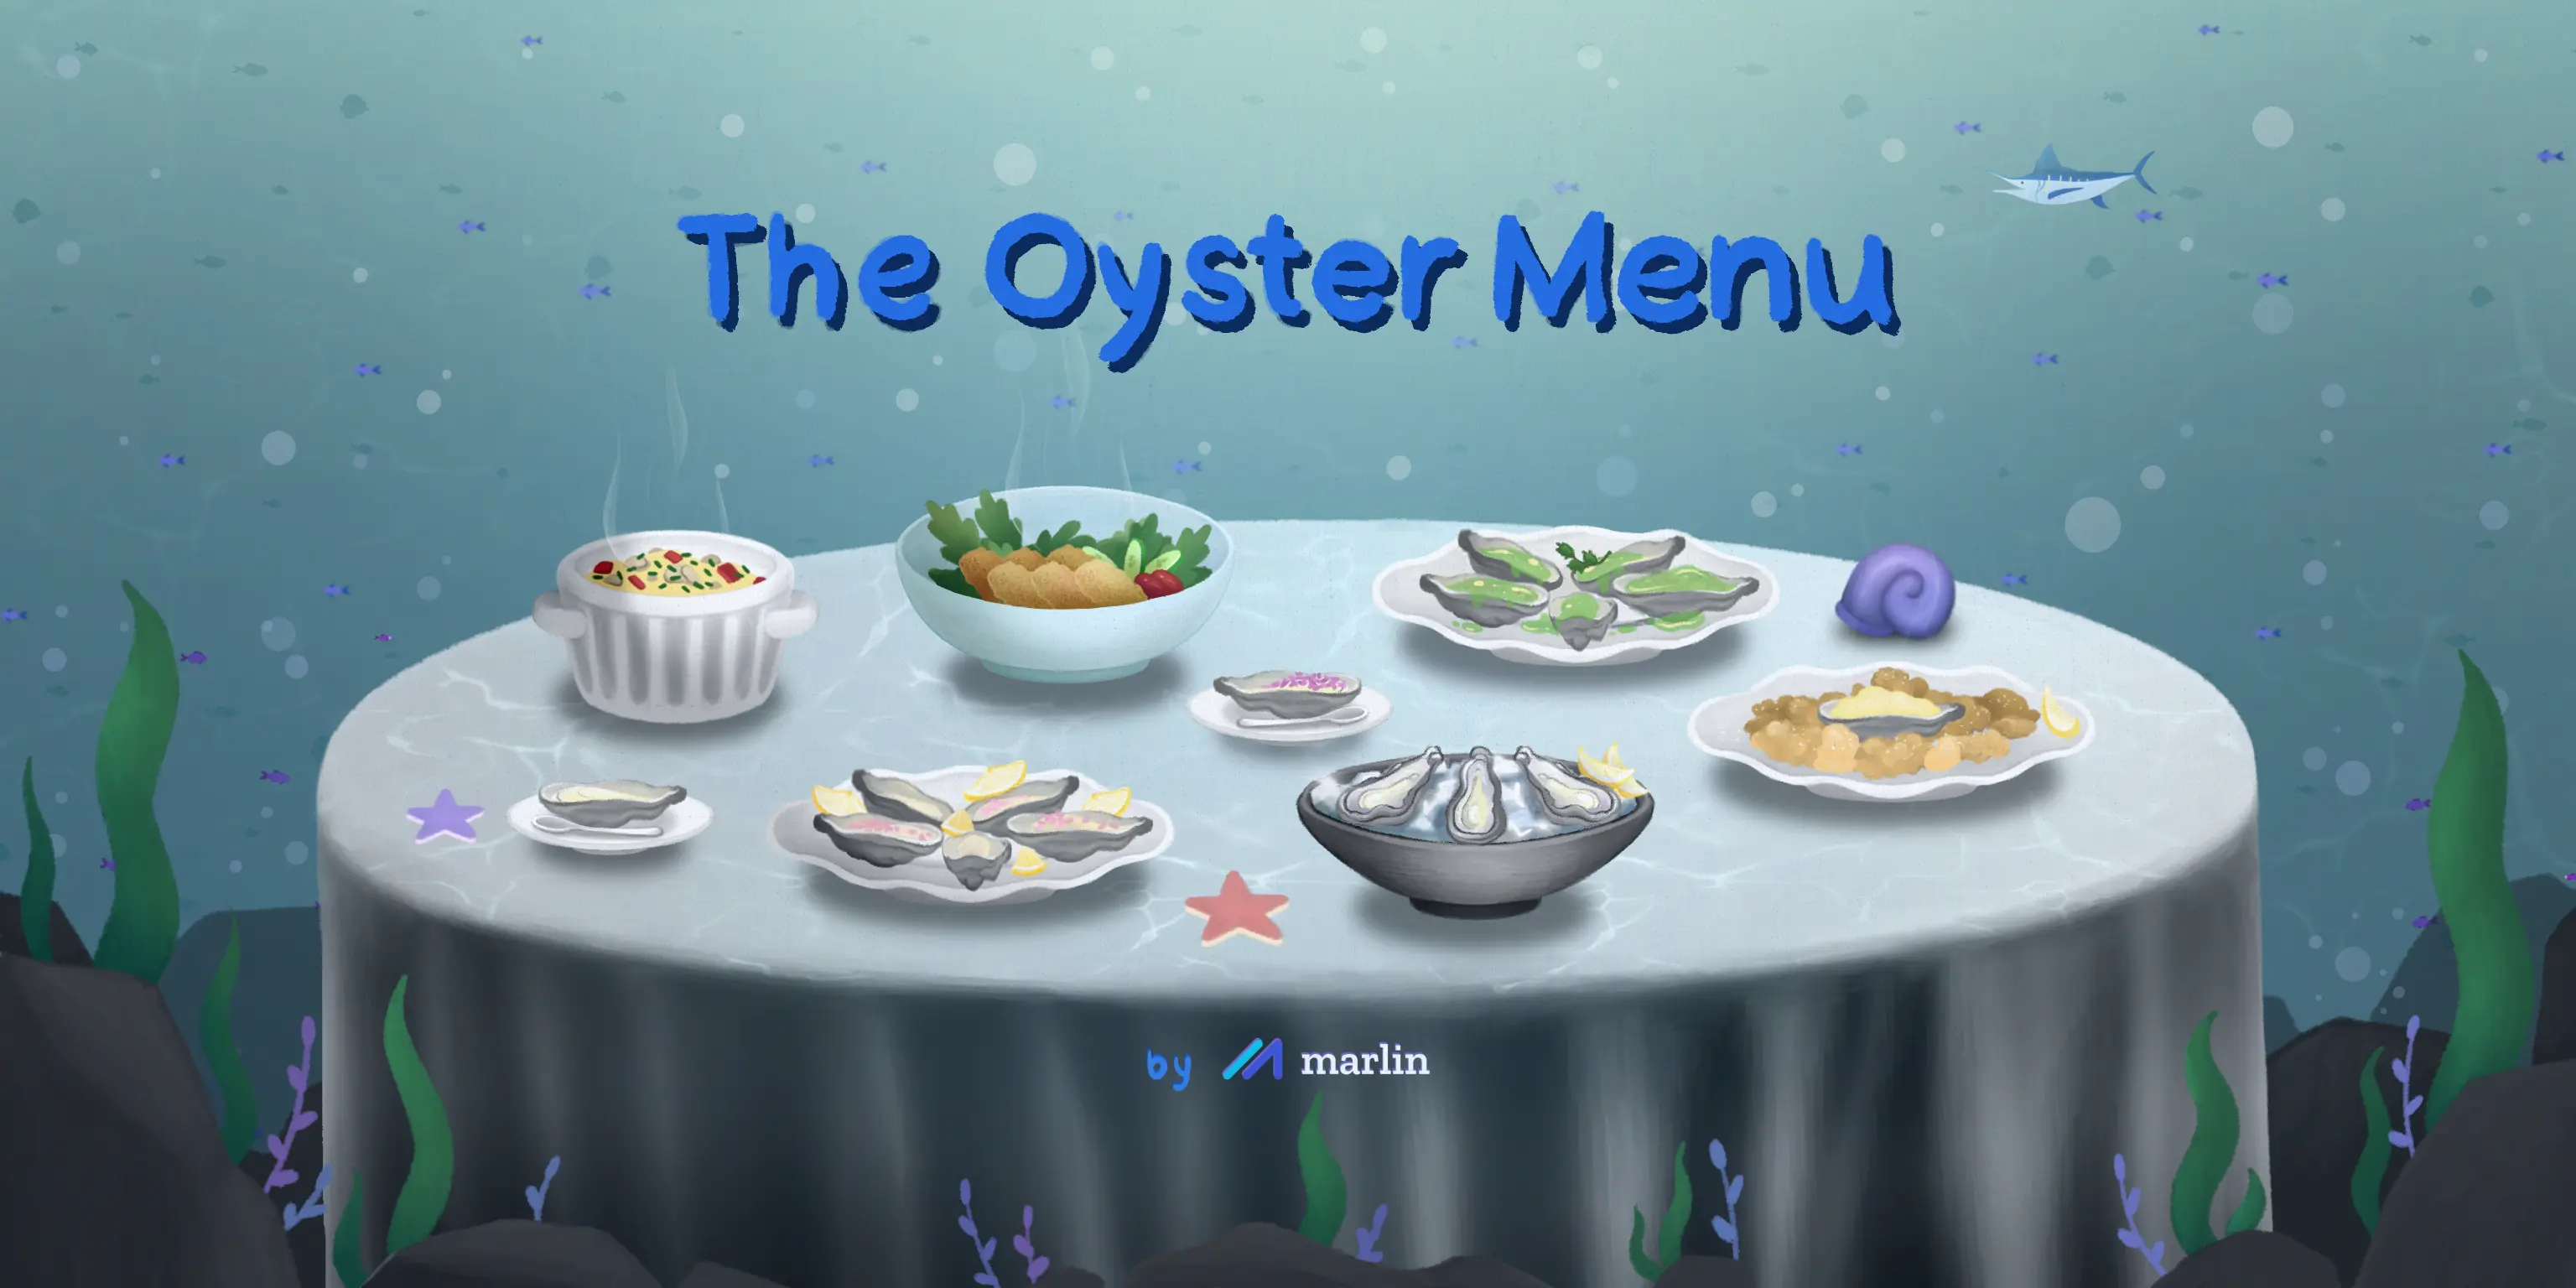 The Oyster Menu: Use cases